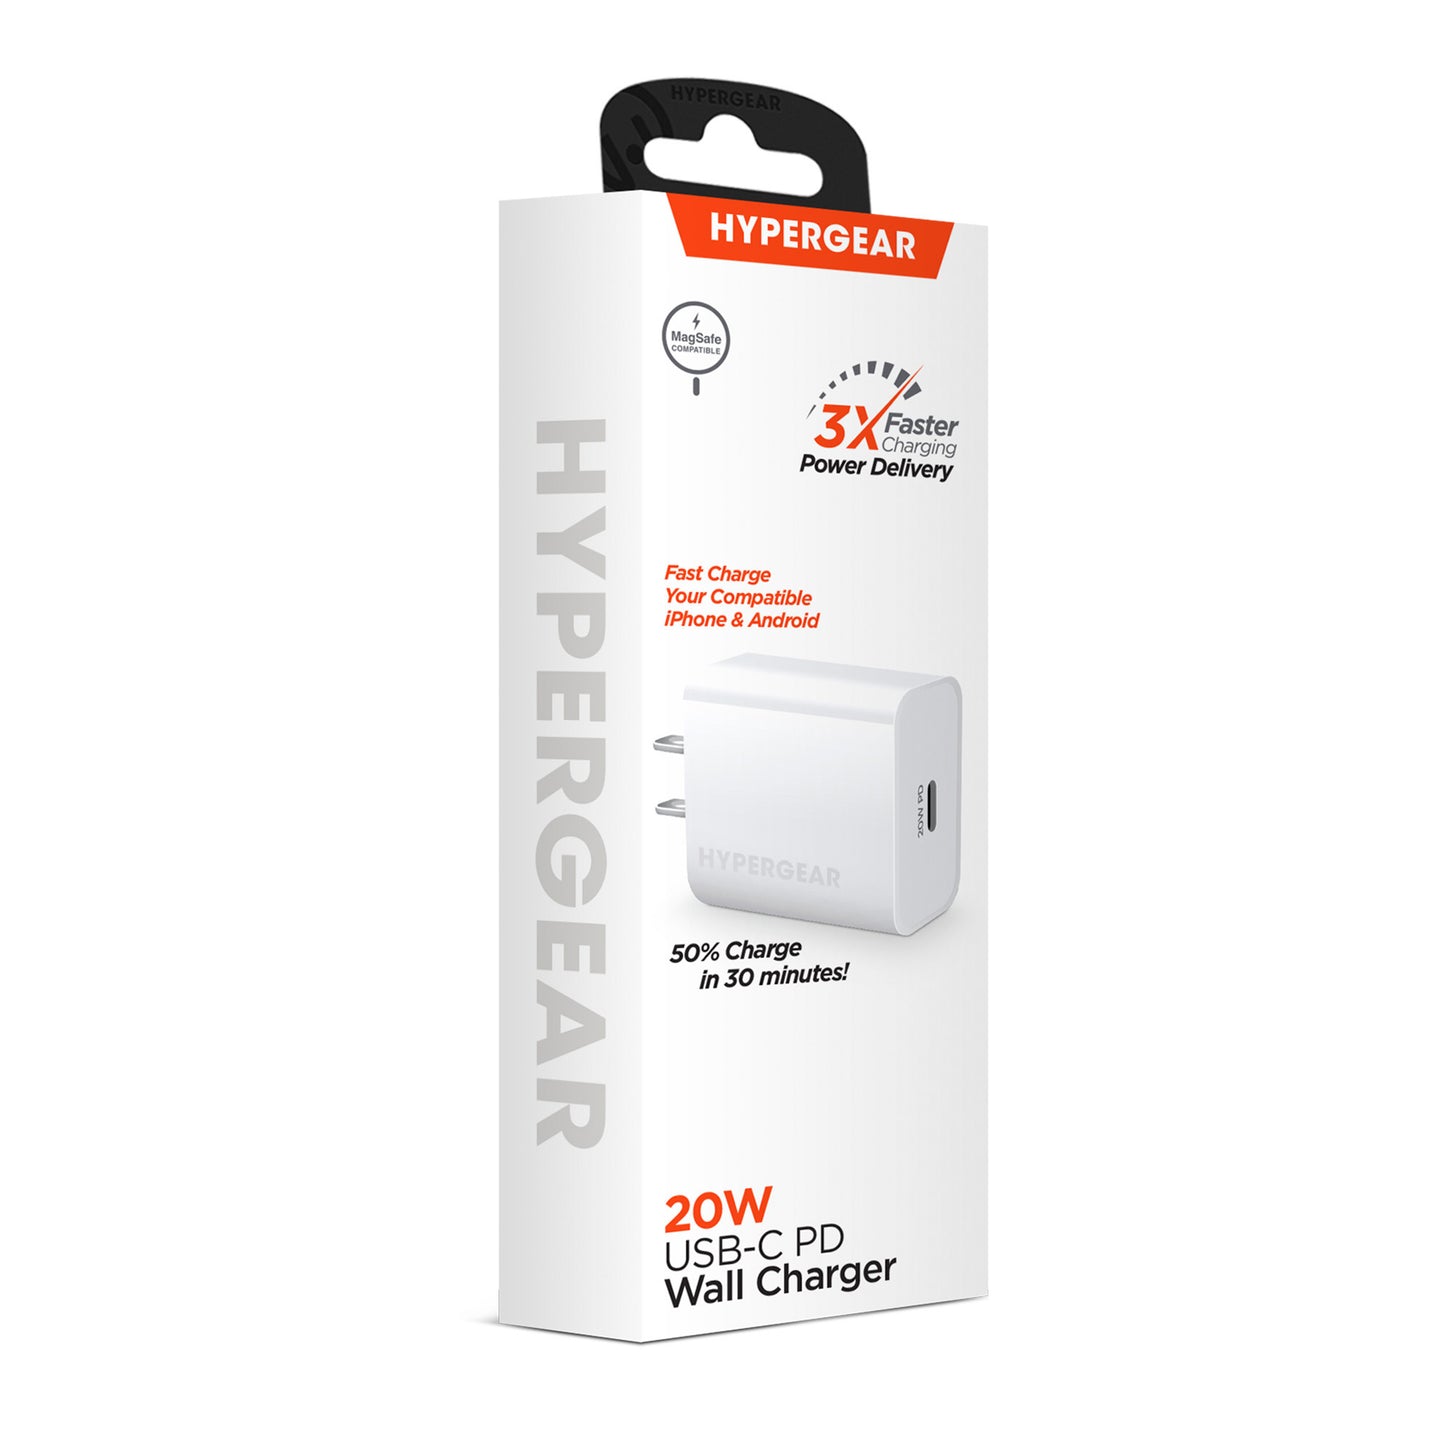 Hypergear 20W White USB-C PD Wall Charger Hub - 15-08214